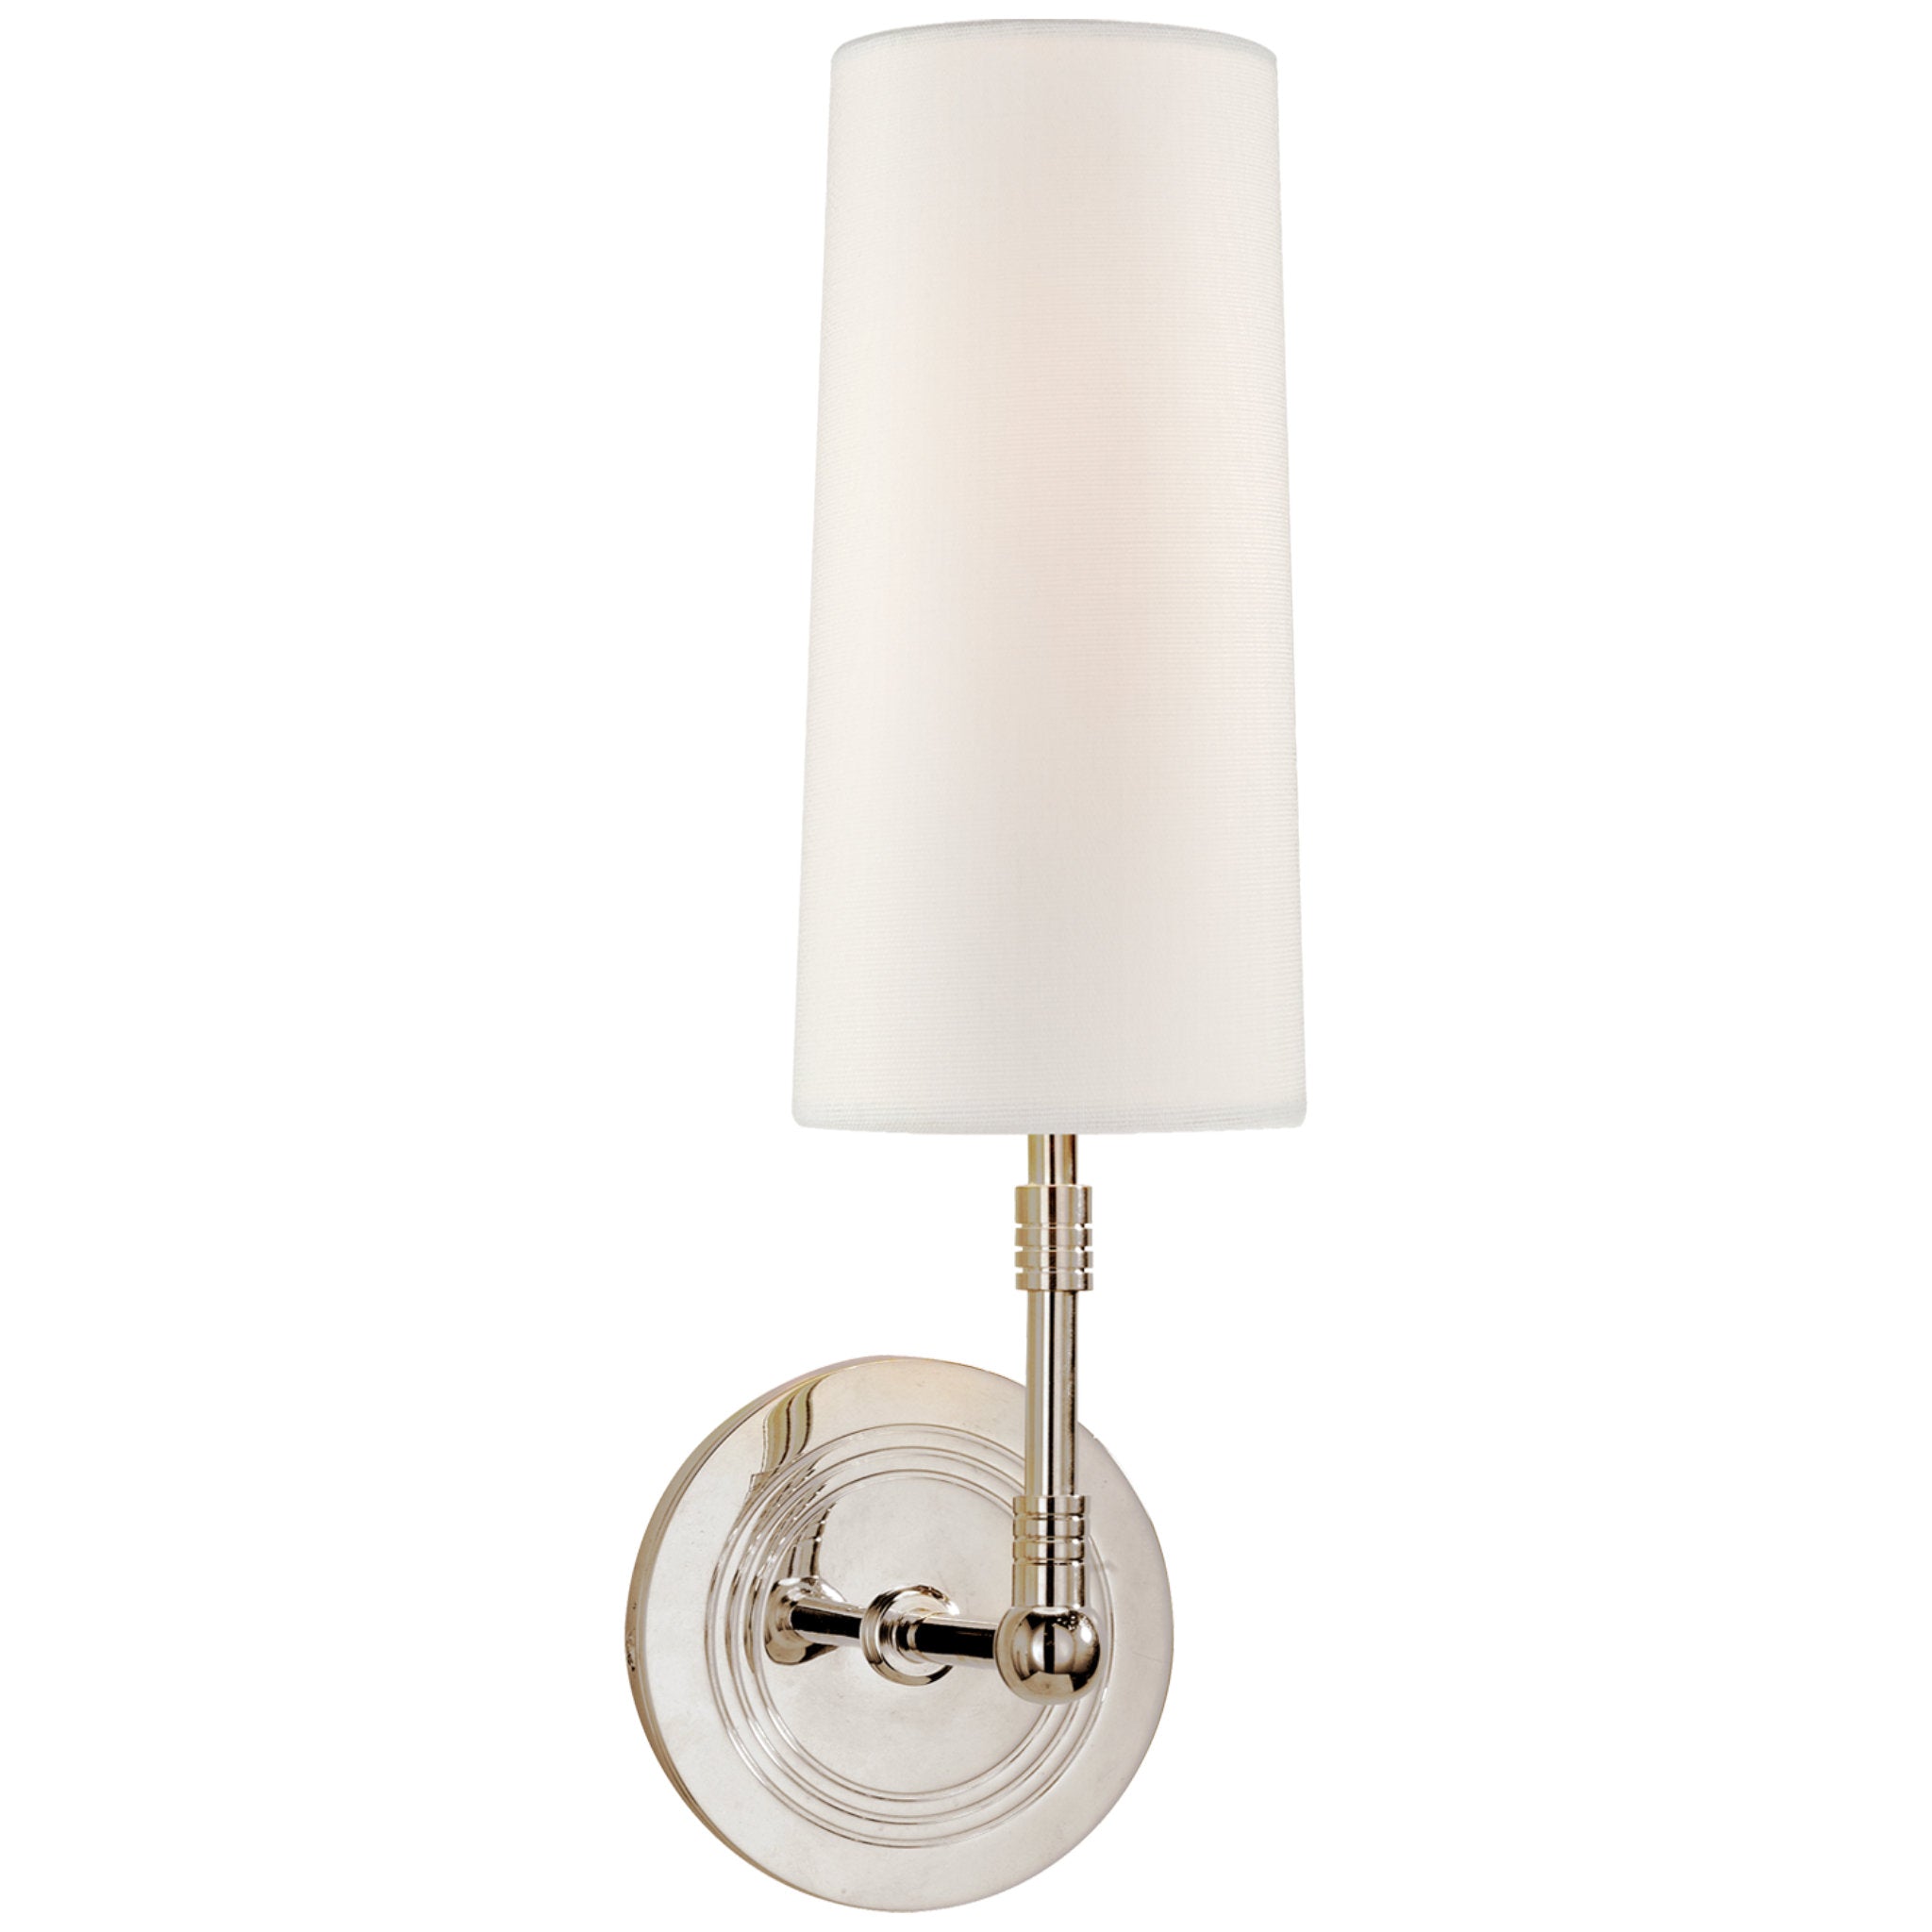 Thomas O'Brien Ziyi Sconce in Polished Nickel with Linen Shade